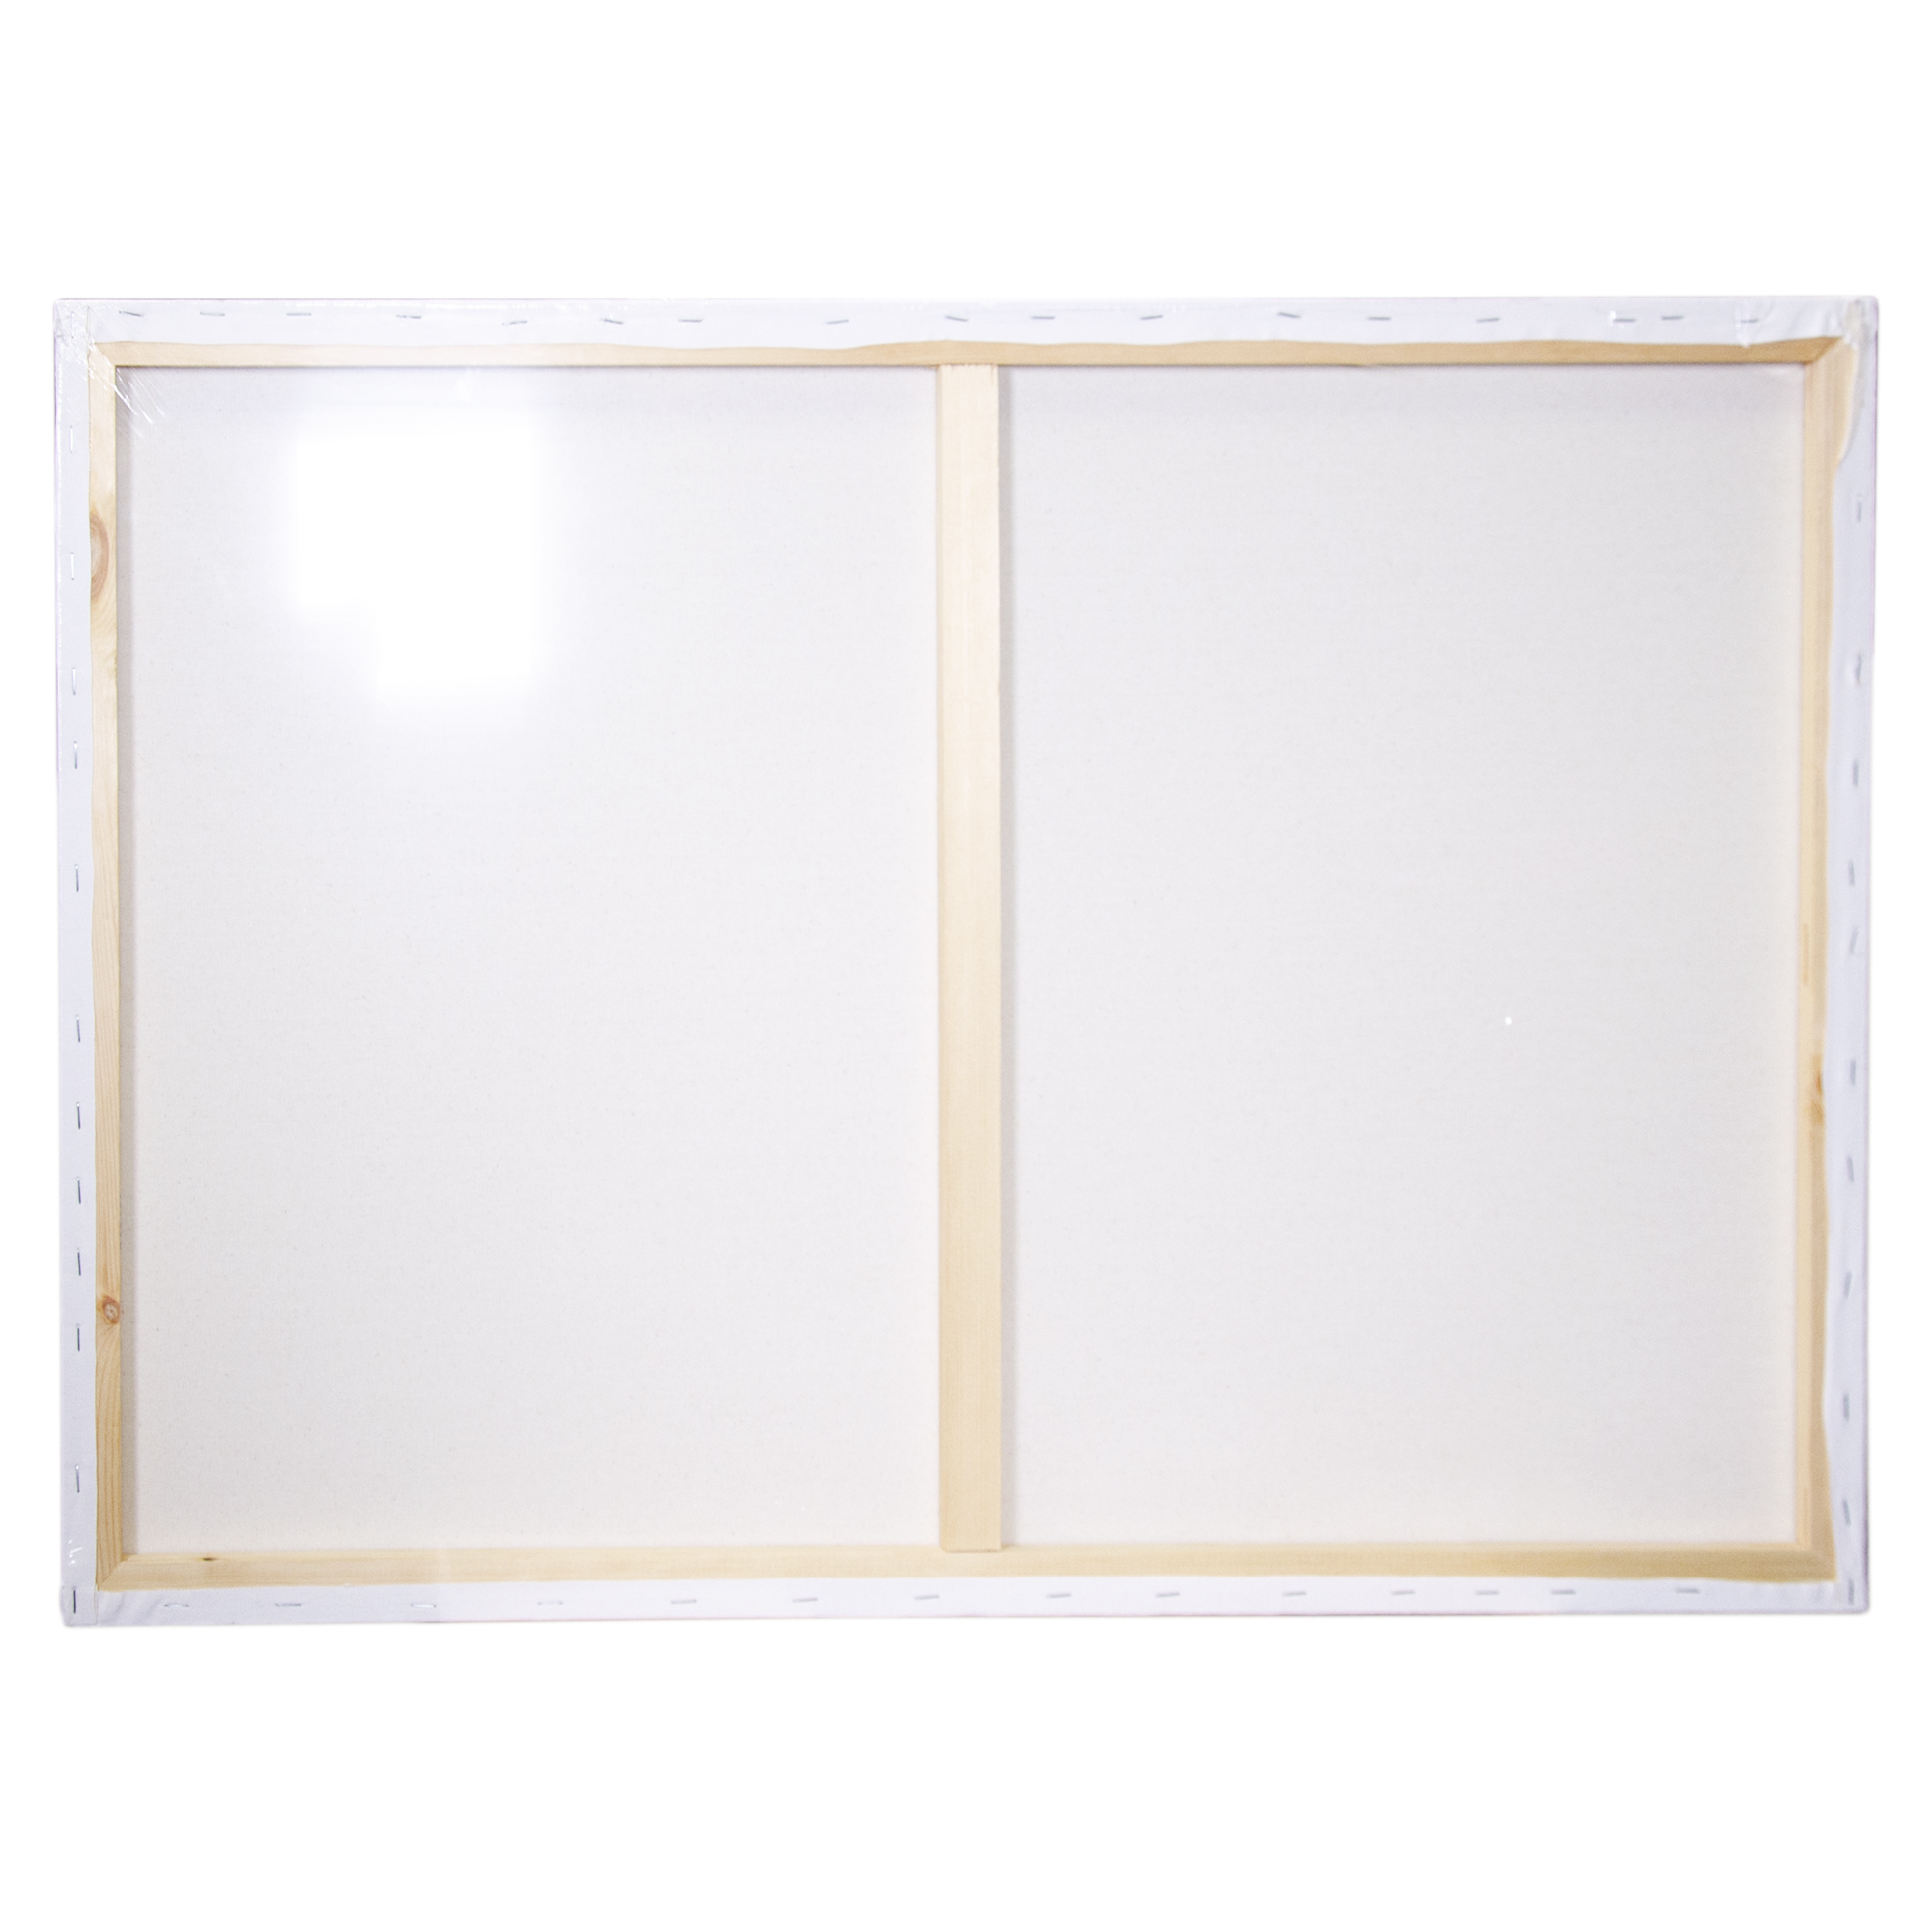 Daler-Rowney Simply Stretched Canvas, White Art Canvas, 24" x 36", 1 Ct - image 2 of 4